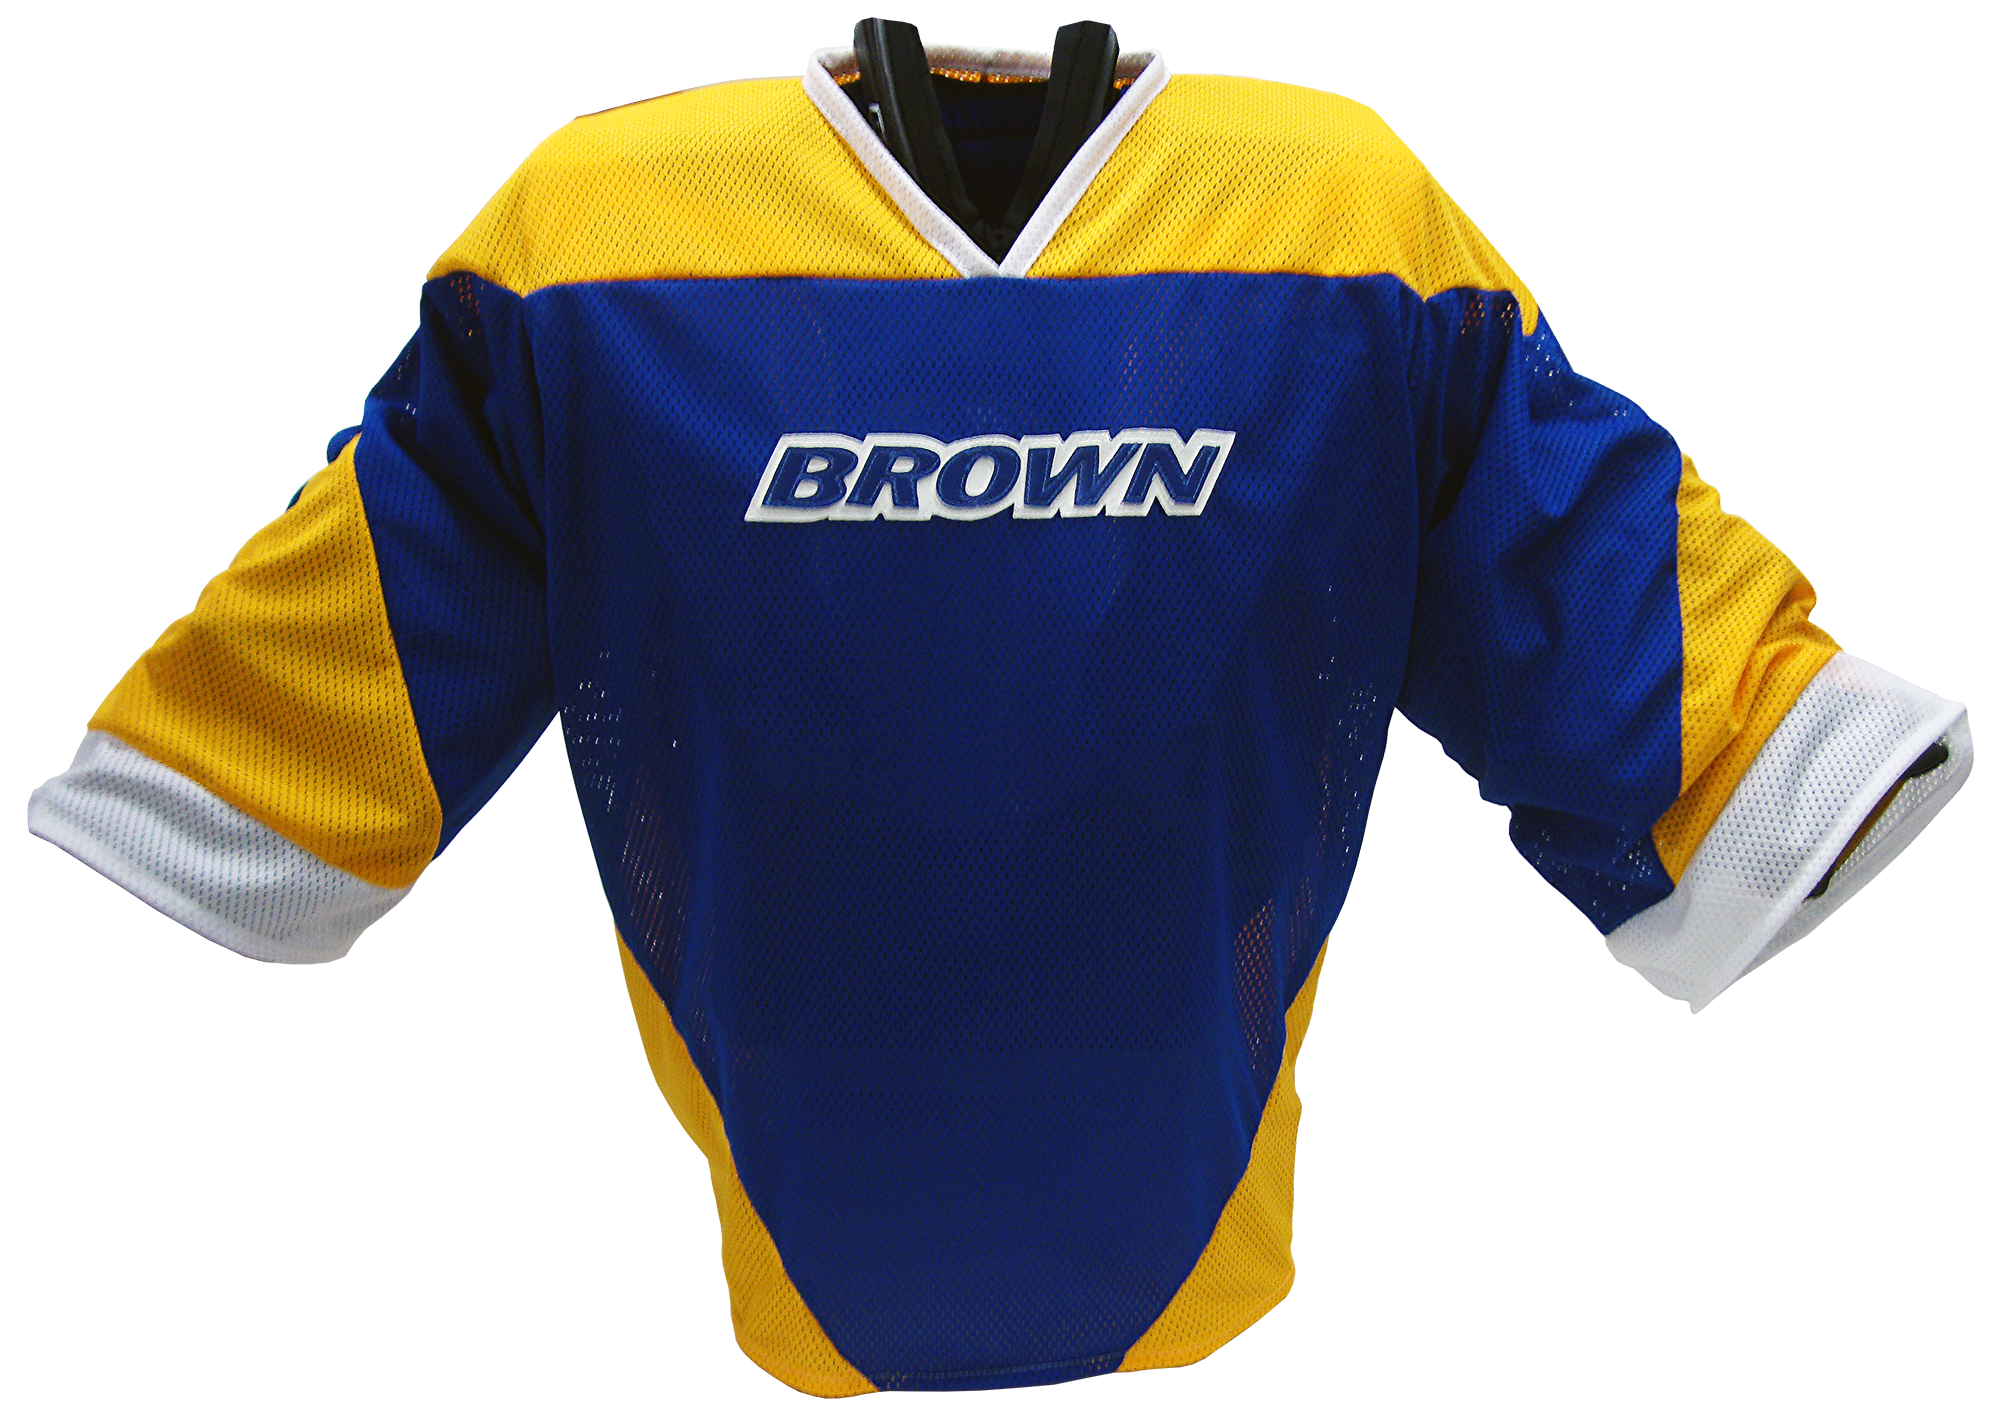 Blue, yellow and white jersey